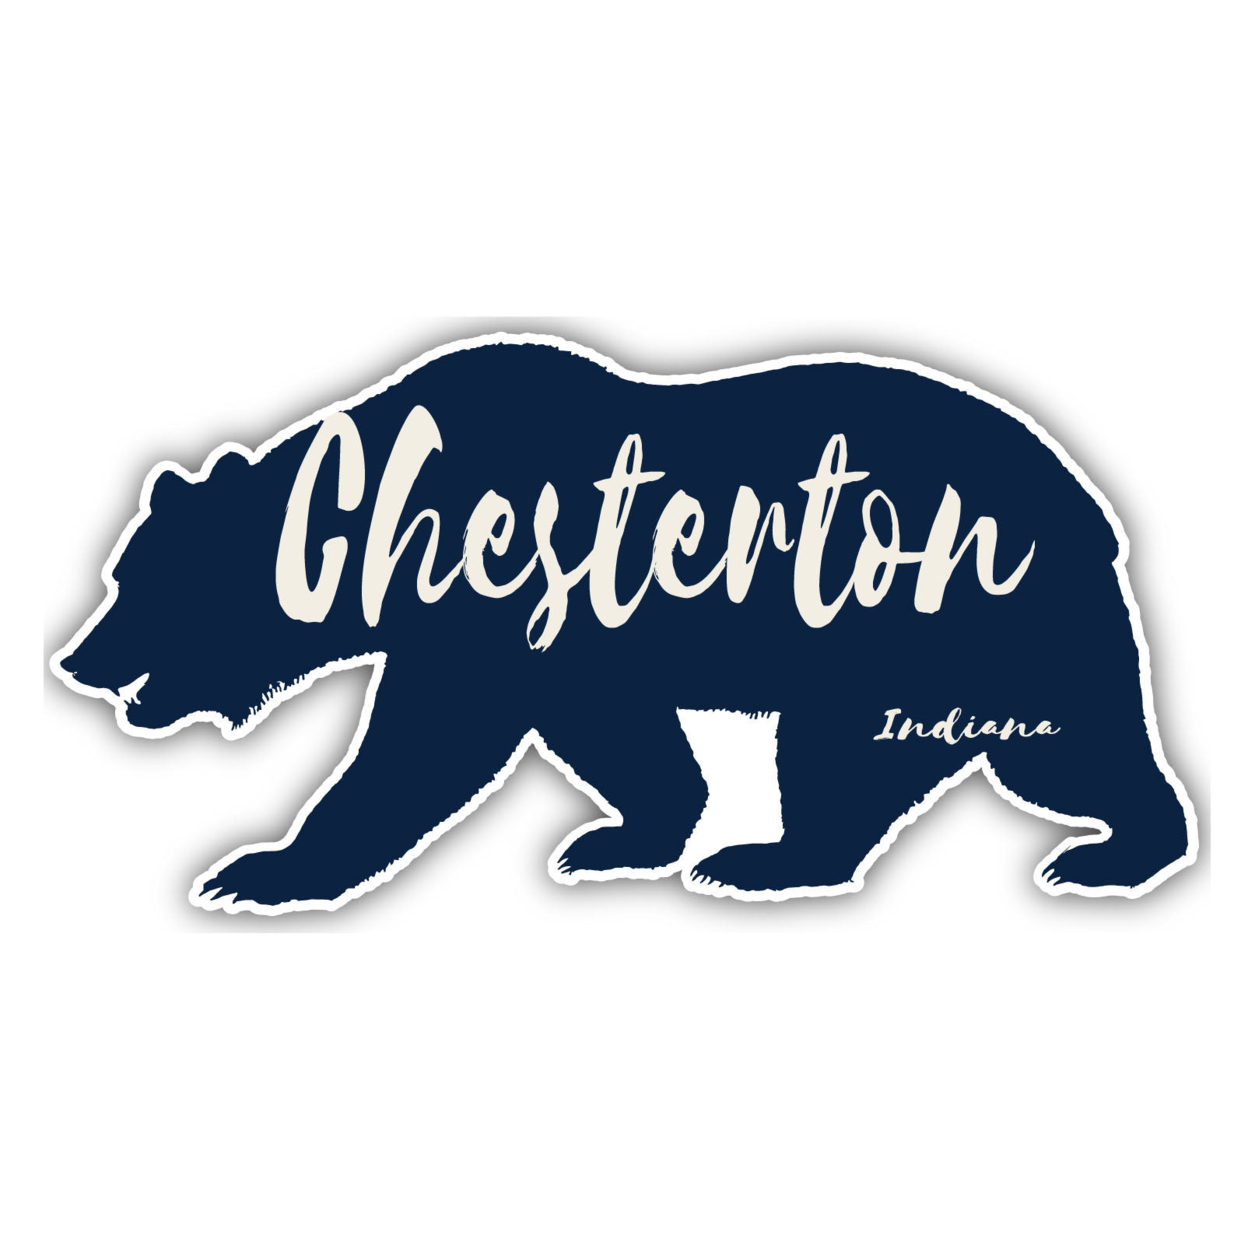 Chesterton Indiana Souvenir Decorative Stickers (Choose Theme And Size) - 4-Pack, 4-Inch, Bear